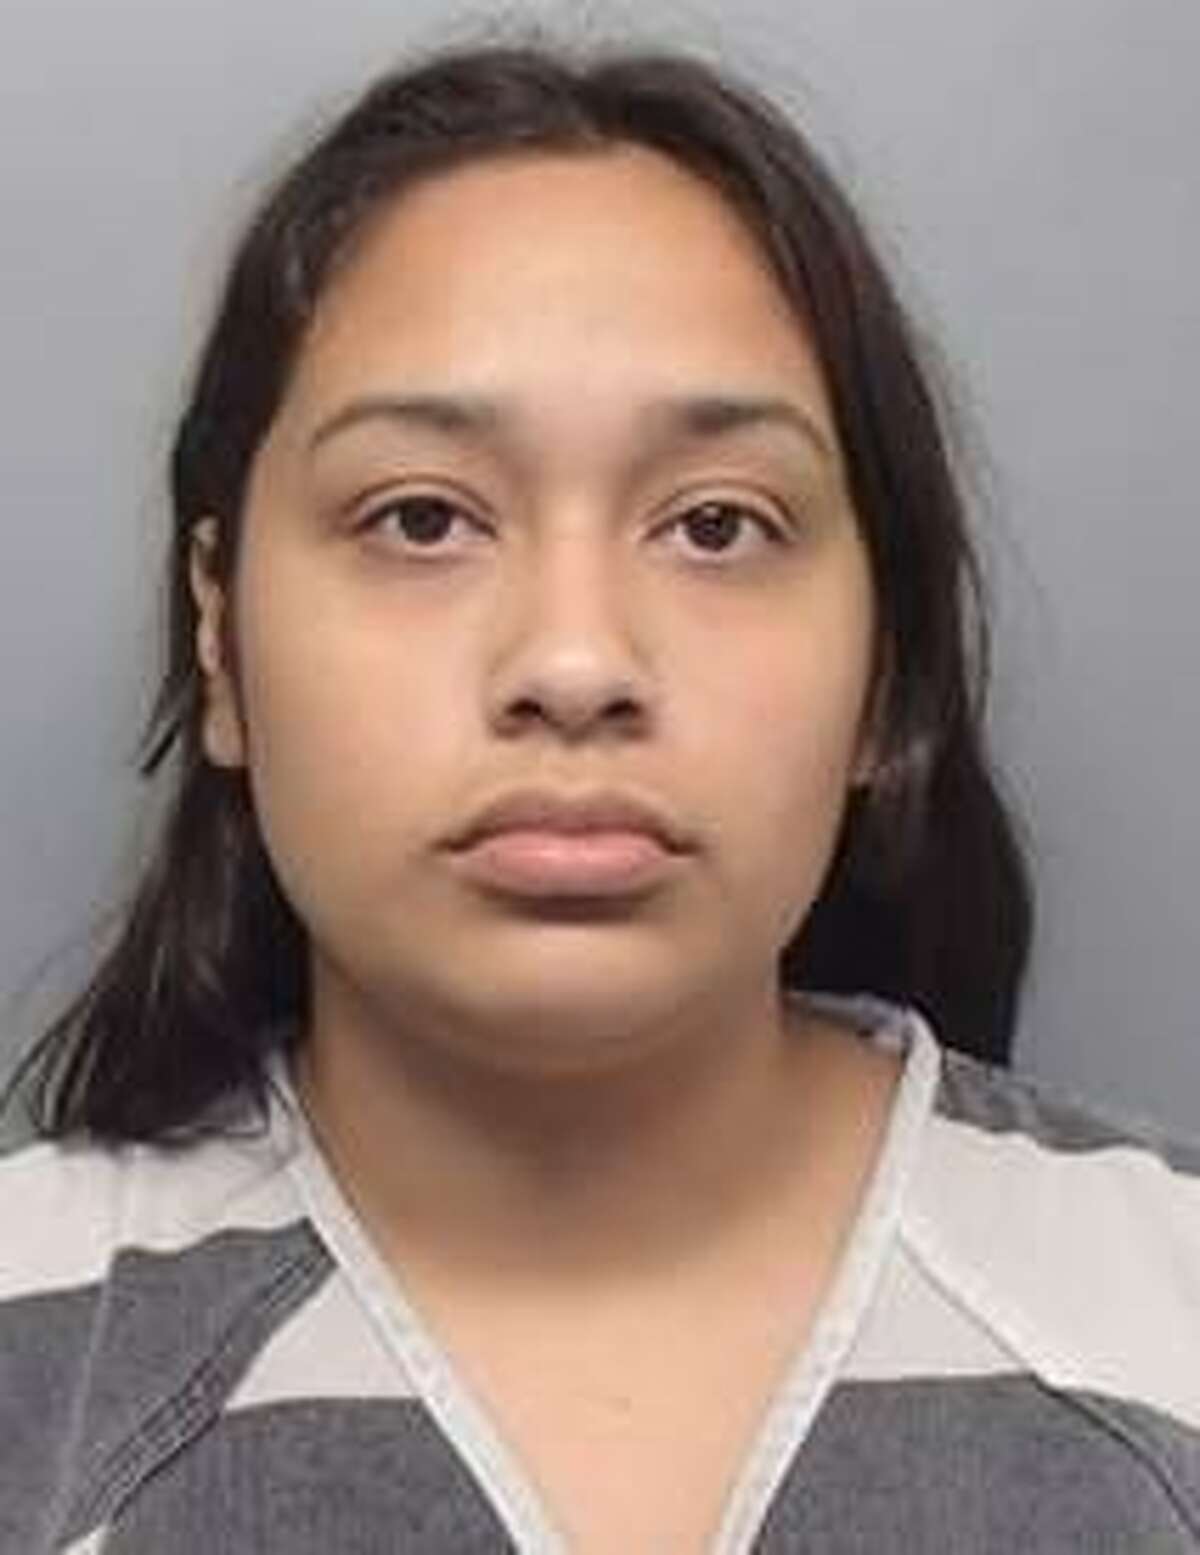 Janette Pantoja is pictured in her mugshot.